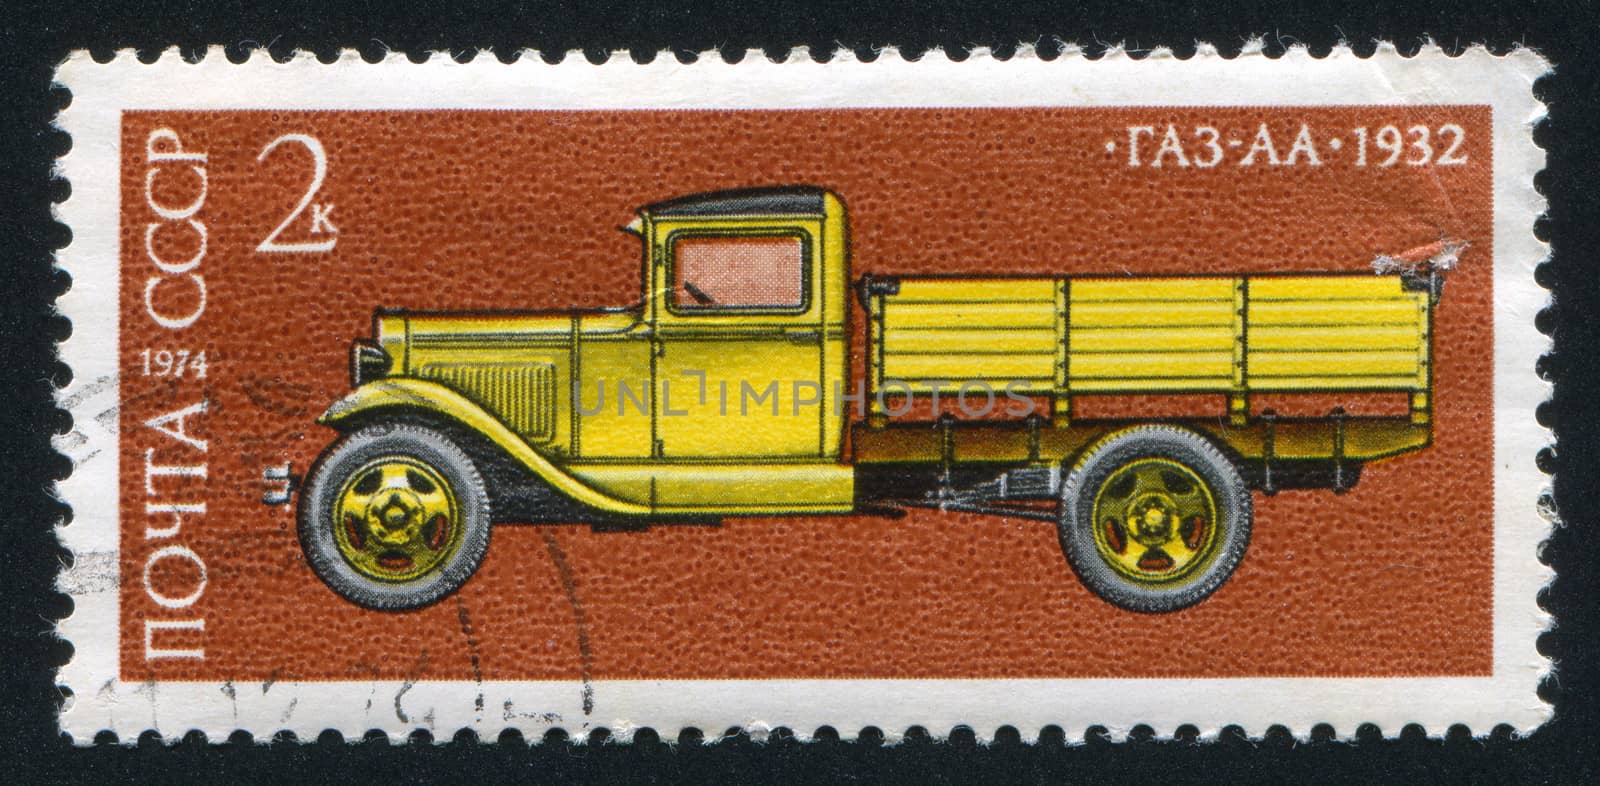 RUSSIA - CIRCA 1974: stamp printed by Russia, shows GAZ AA truck, 1932, circa 1974